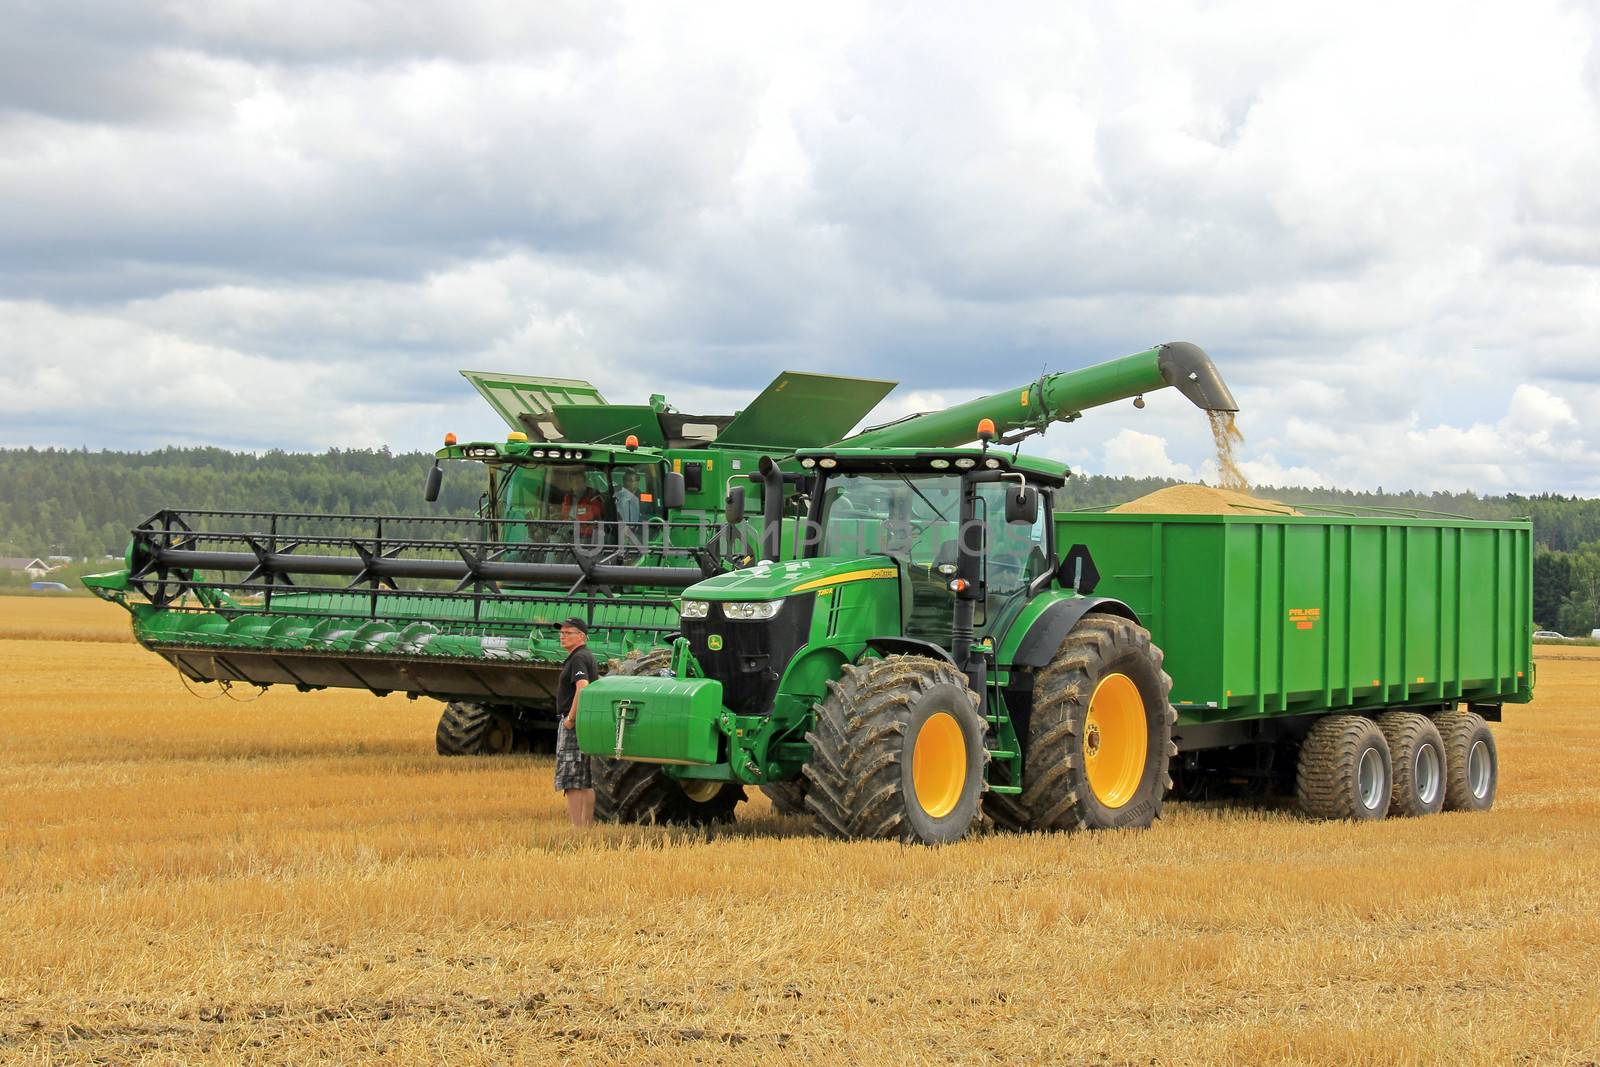 SALO, FINLAND - AUGUST 10: John Deere Combine harvester unloading grain on Palmse 1900 trailer behind Deere 7280R tractor, at the annual Puontin Peltopaivat Agricultural Show in Salo, Finland on August 10, 2013.